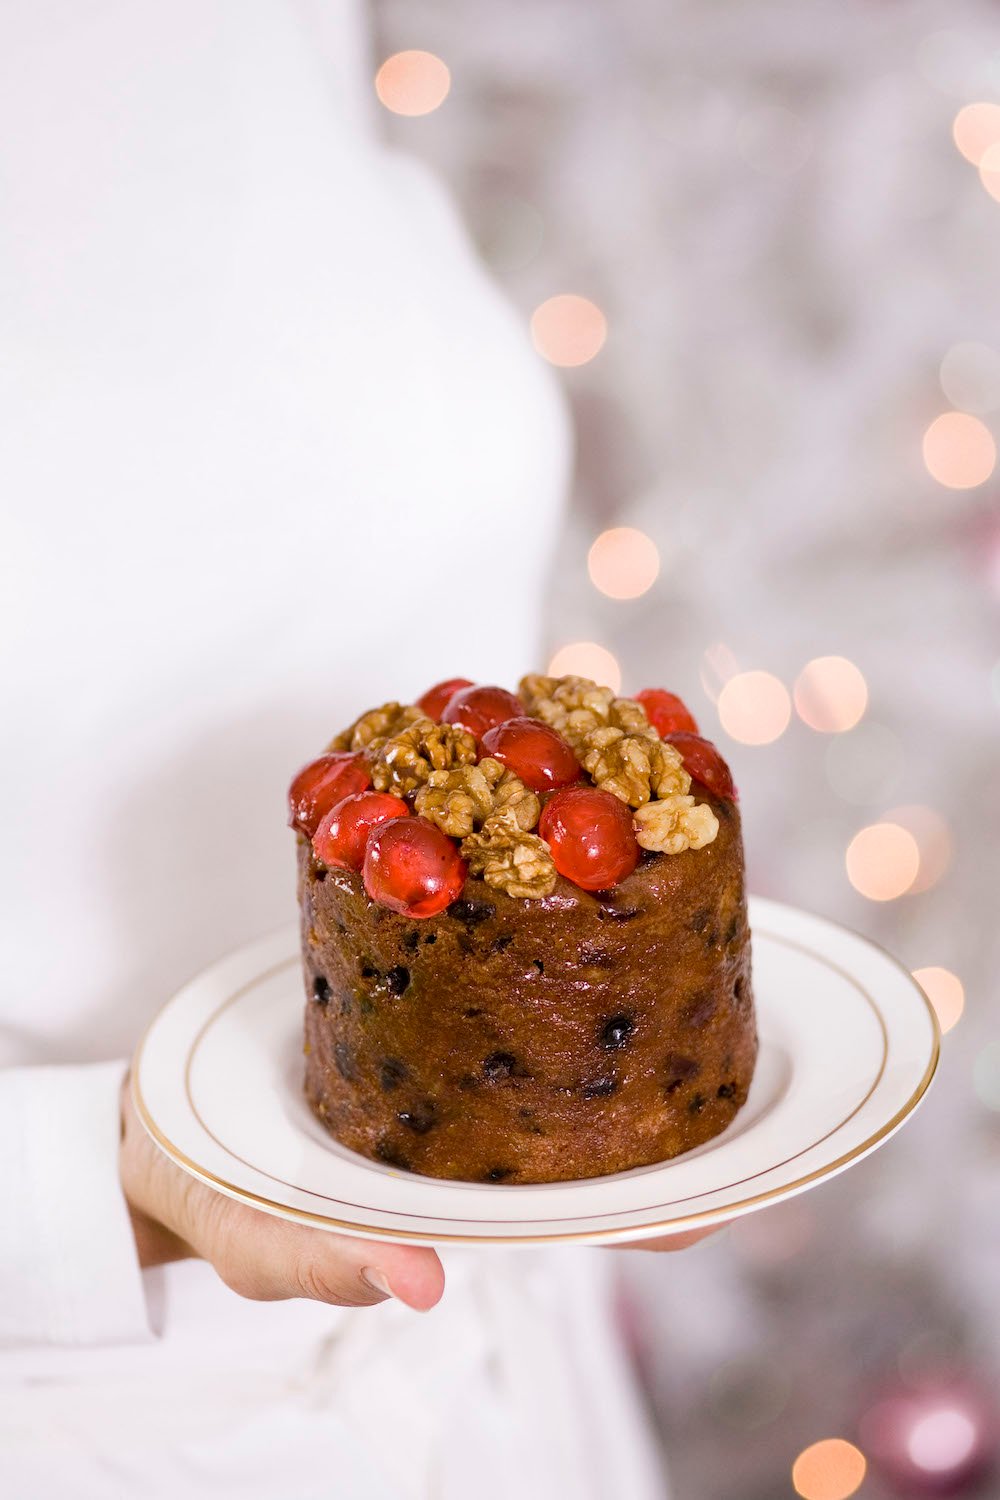 A small Christmas cake on a white plate held in front of sparkly lights